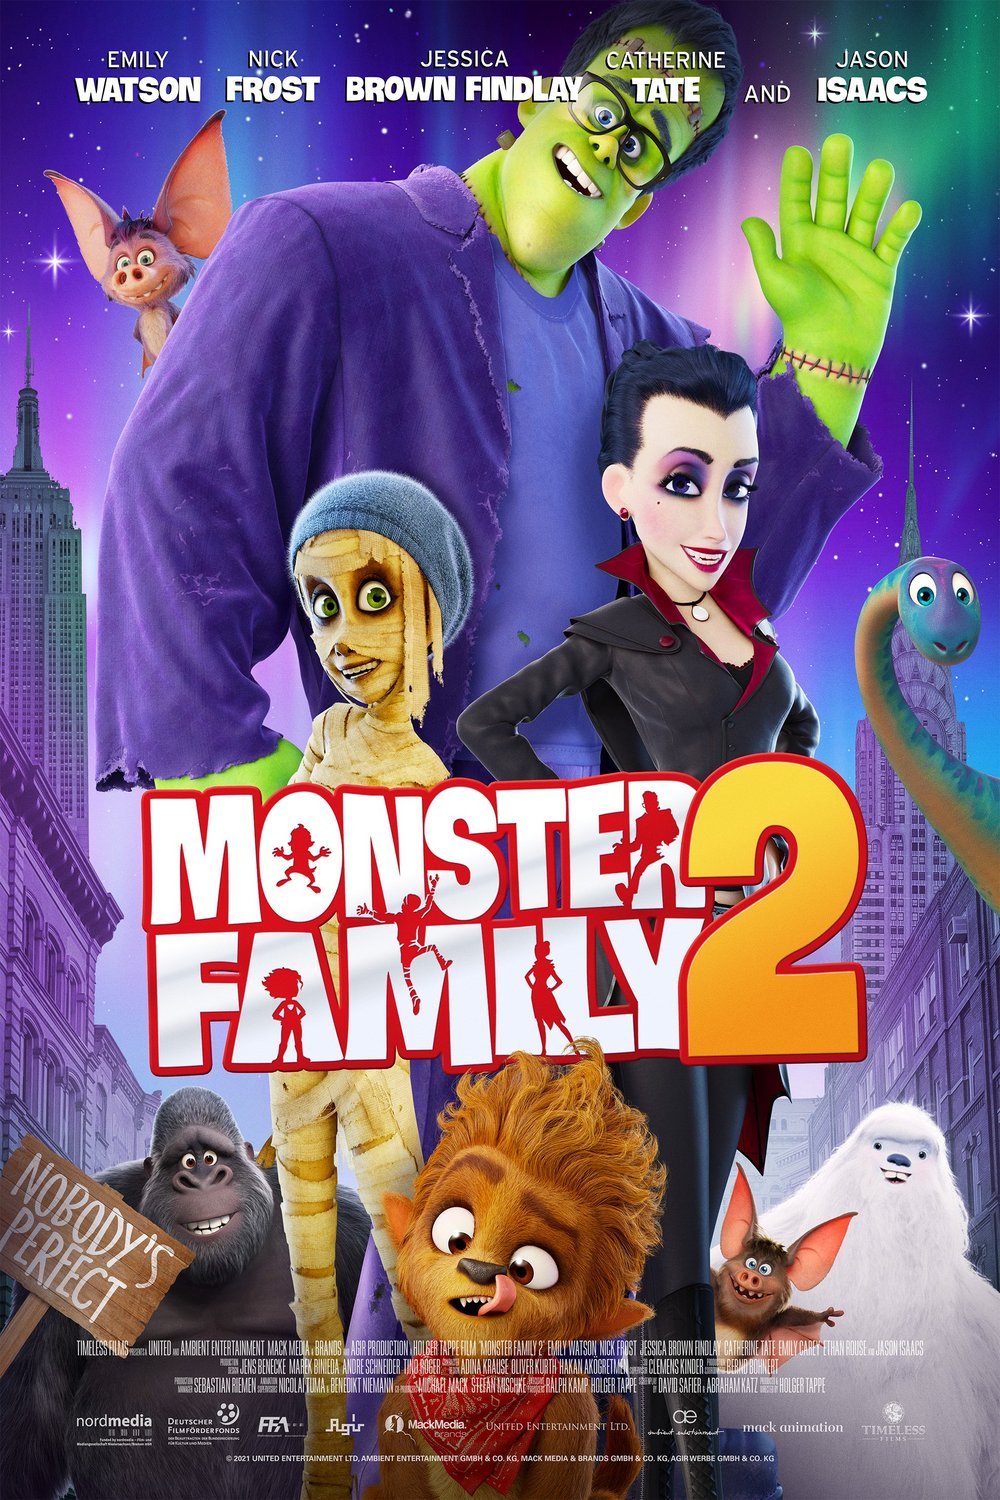 Poster of the movie Monster Family 2